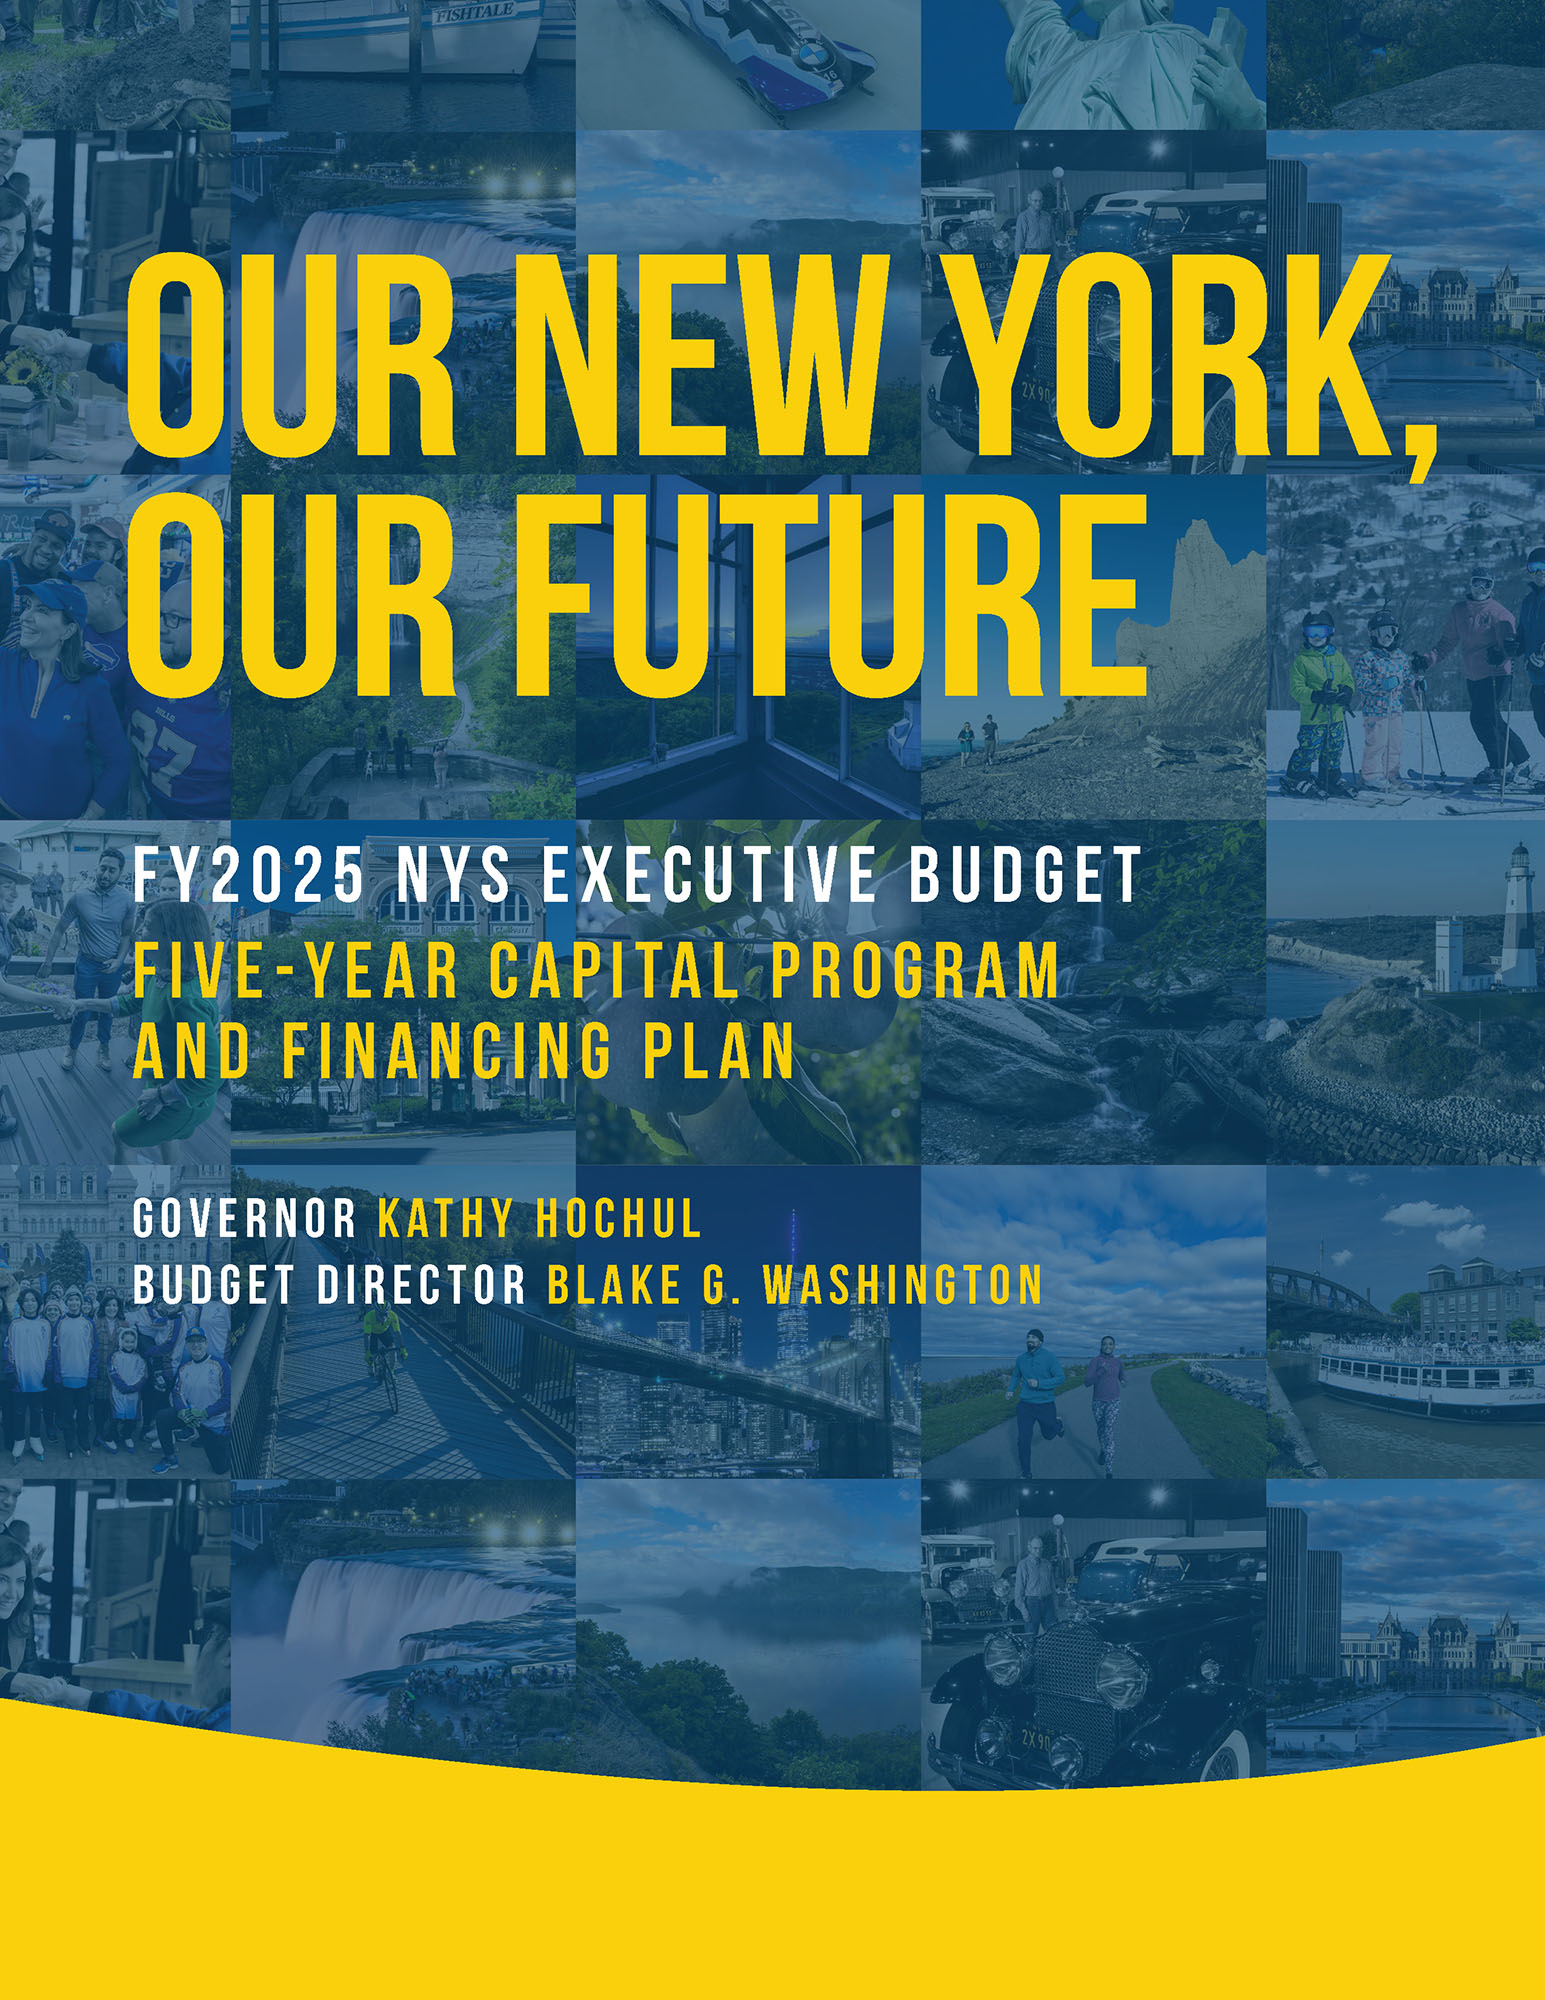 FY 2025 Capital Plan Cover